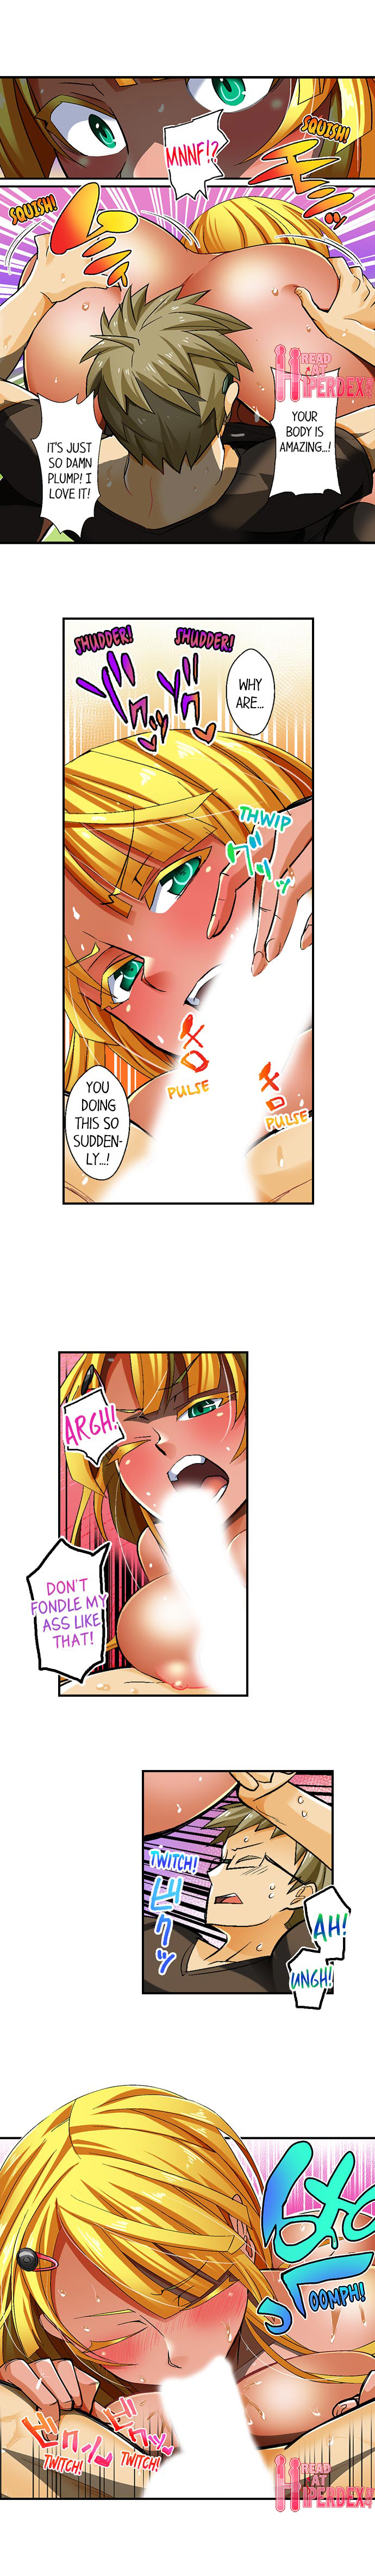 Sex With a Tanned Girl in a Bathhouse - Chapter 6 Page 4